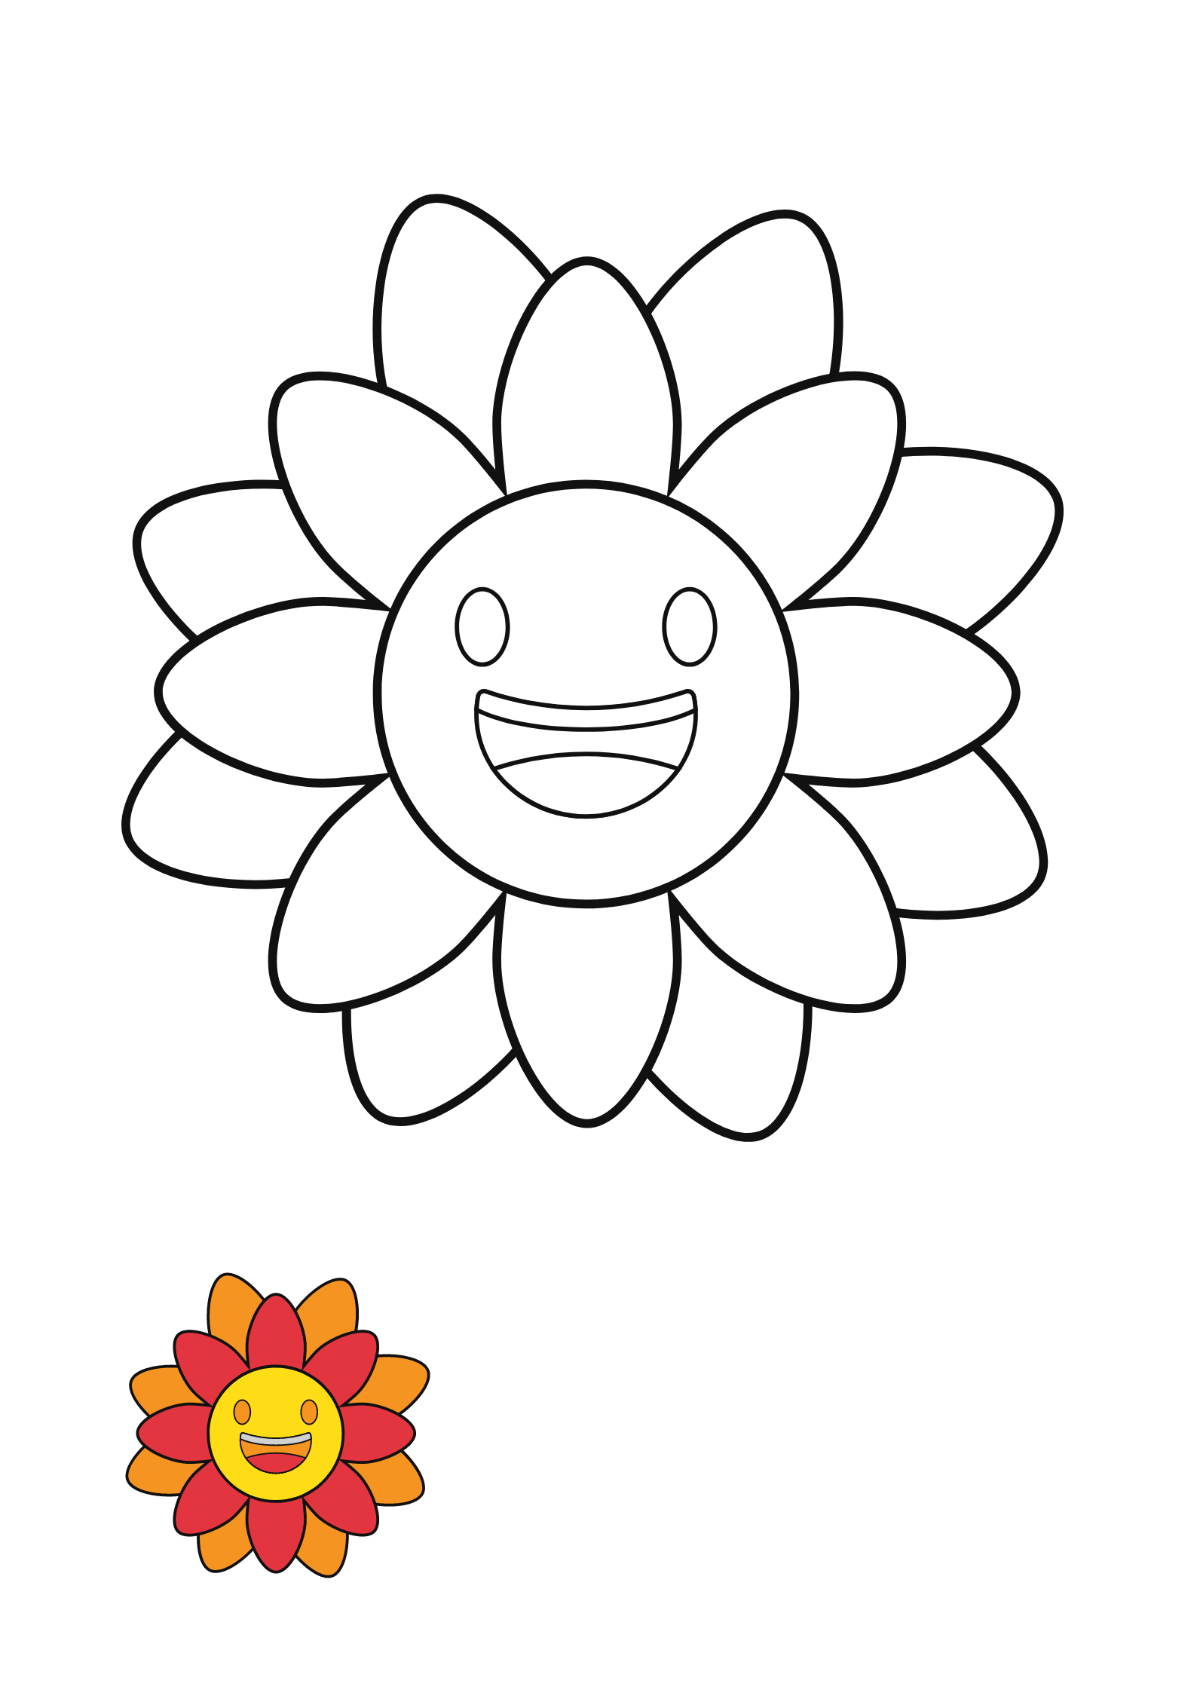 Flower Smiley coloring page Template